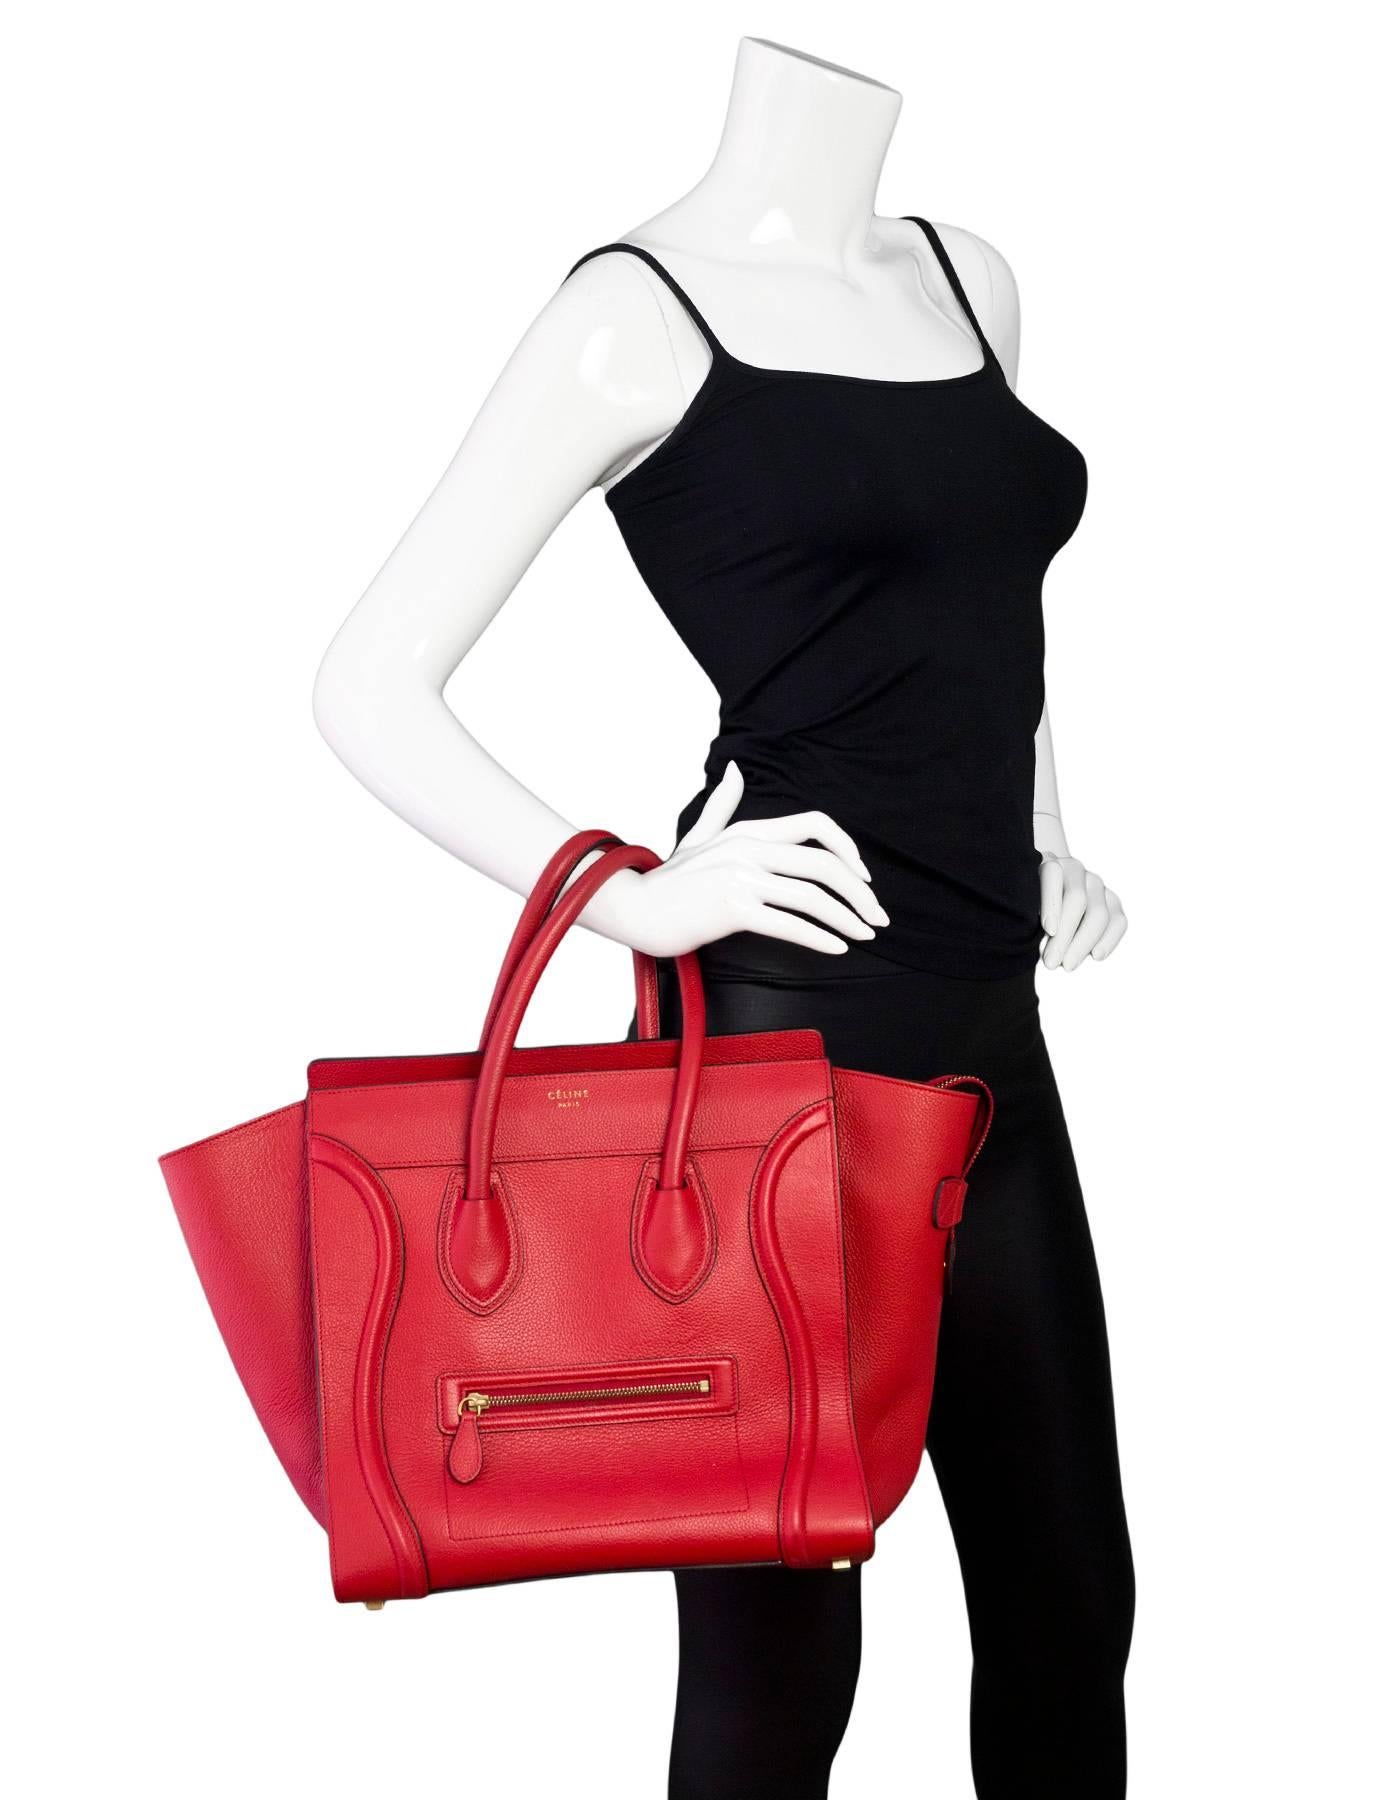 Celine Red Drummed Leather Mini Luggage Tote 

Made In: Italy
Color: Red
Hardware: Goldtone
Materials: Drummed leather
Lining: Red suede
Closure/Opening: Zip across top
Exterior Pockets: One zipper pocket
Interior Pockets: One zipper pocket, one